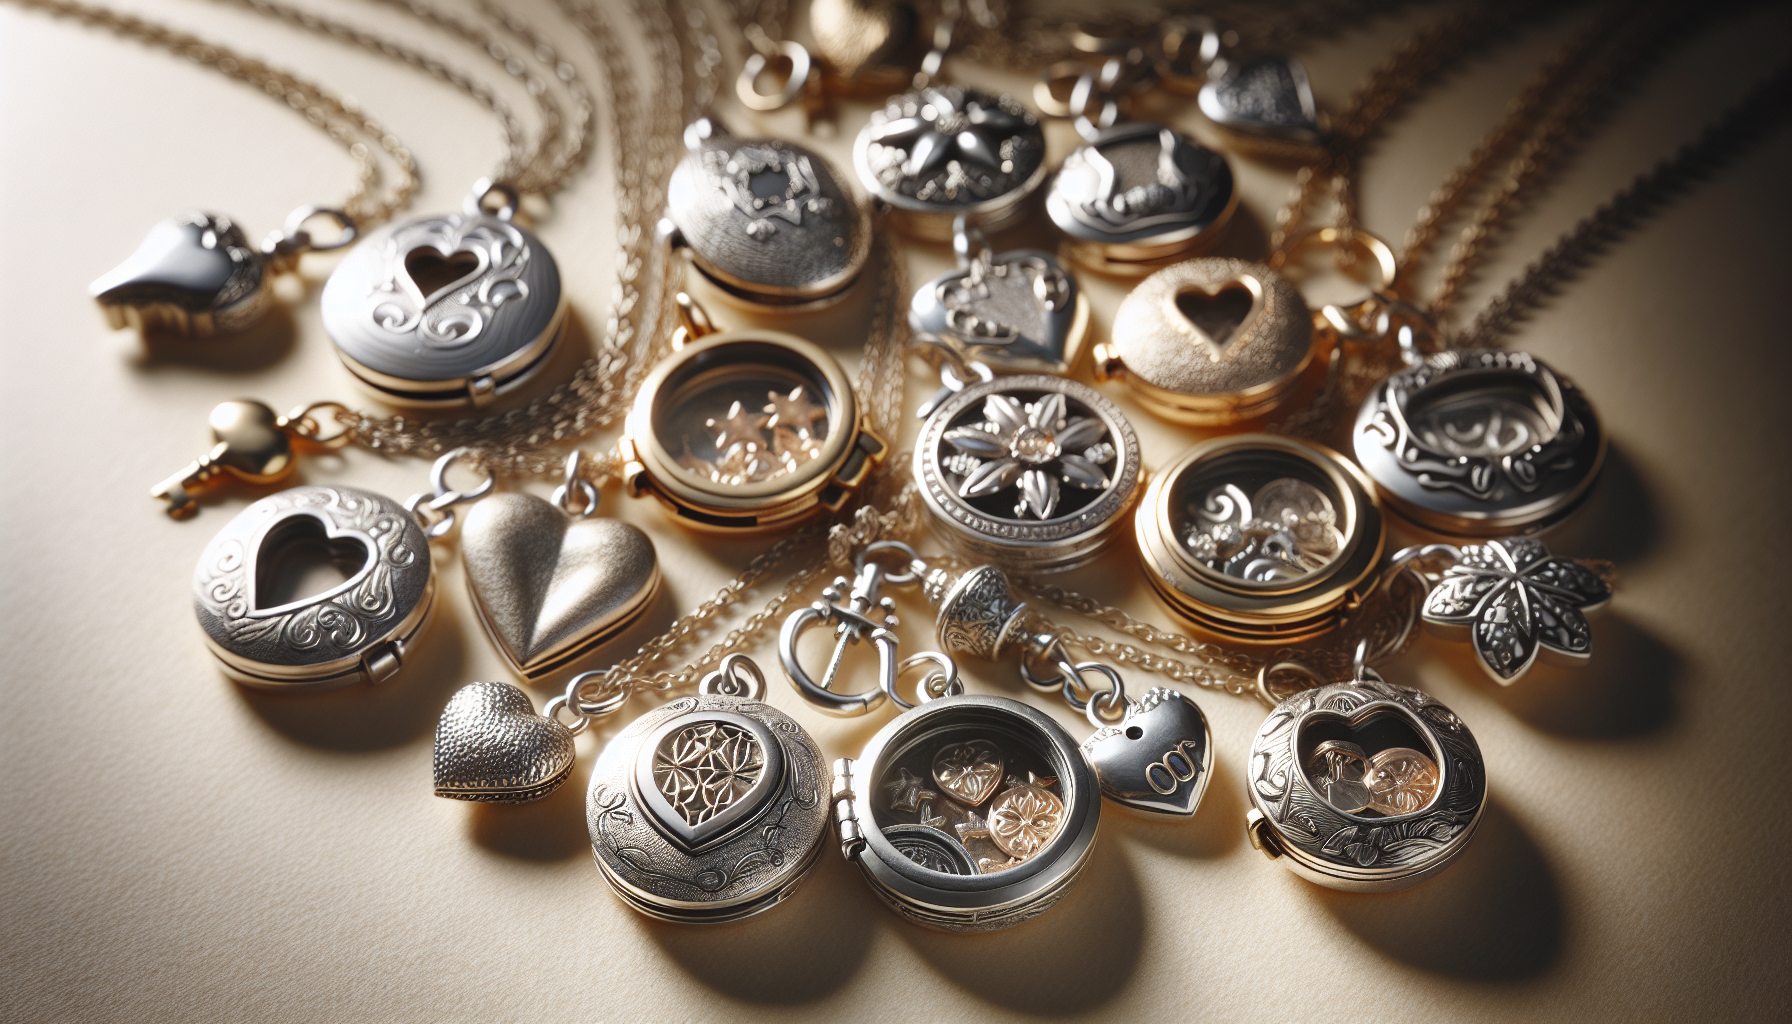 A collection of small, charming and intricate locket jewelry with various types of charms carefully crafted. The material of the lockets ranges from silver to gold, all adorned with delicate etchings.